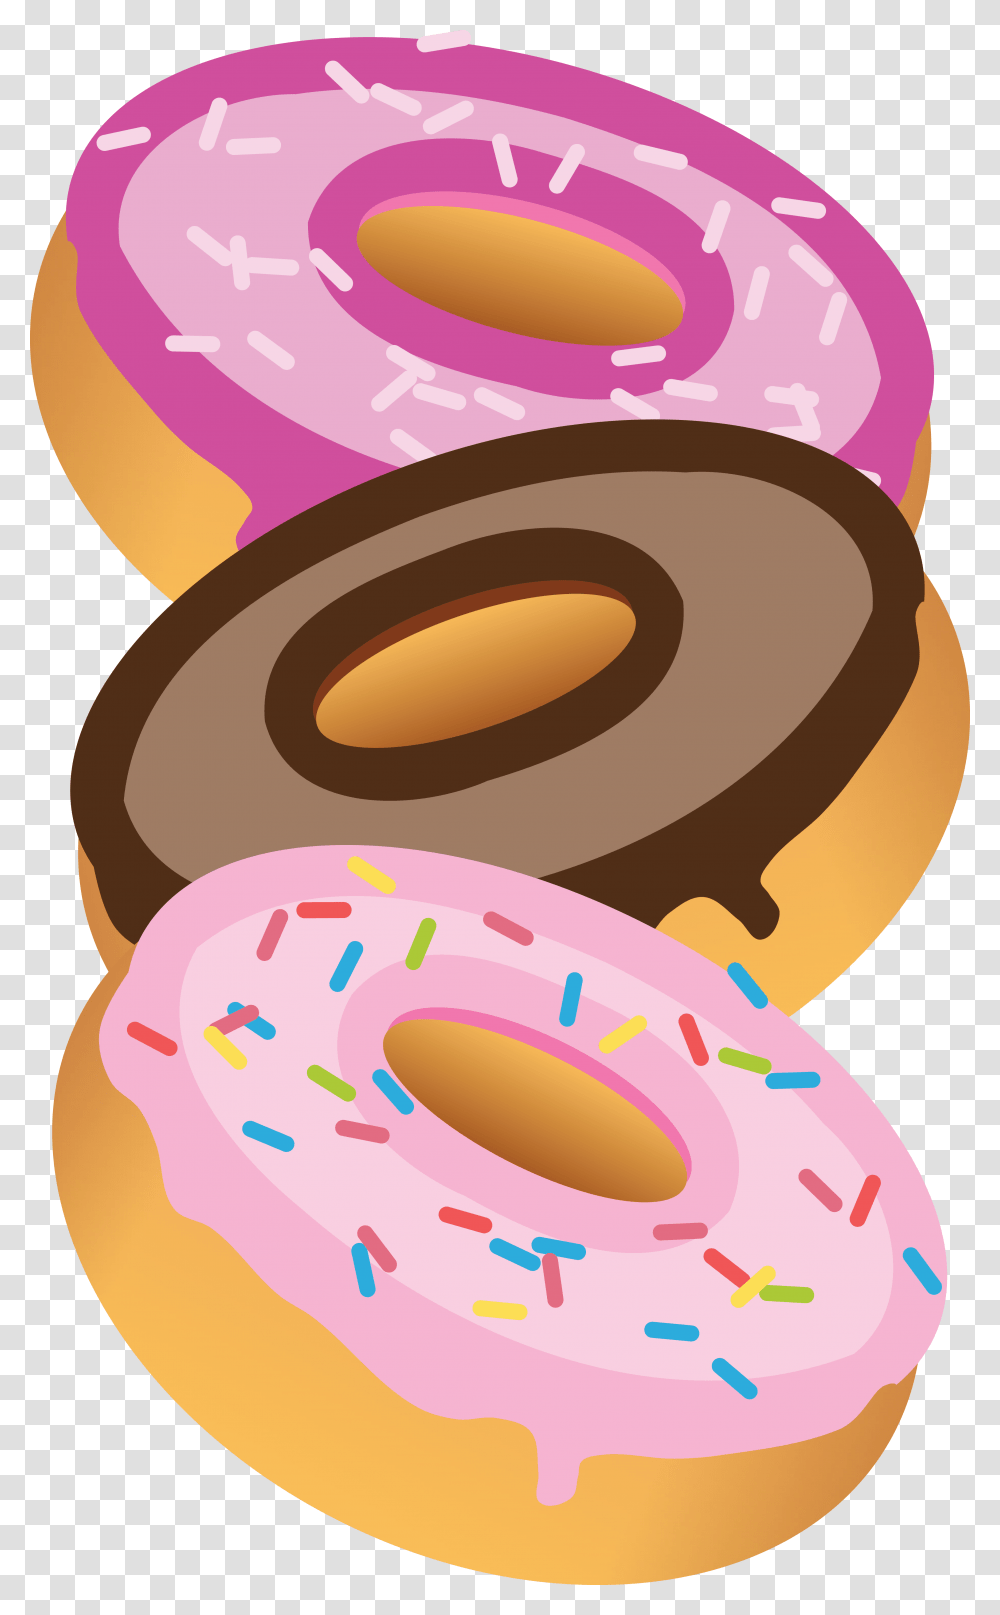 Jpg Eps Ai Svg Cdr Donut Invitation Template Free, Pastry, Dessert, Food, Sweets Transparent Png